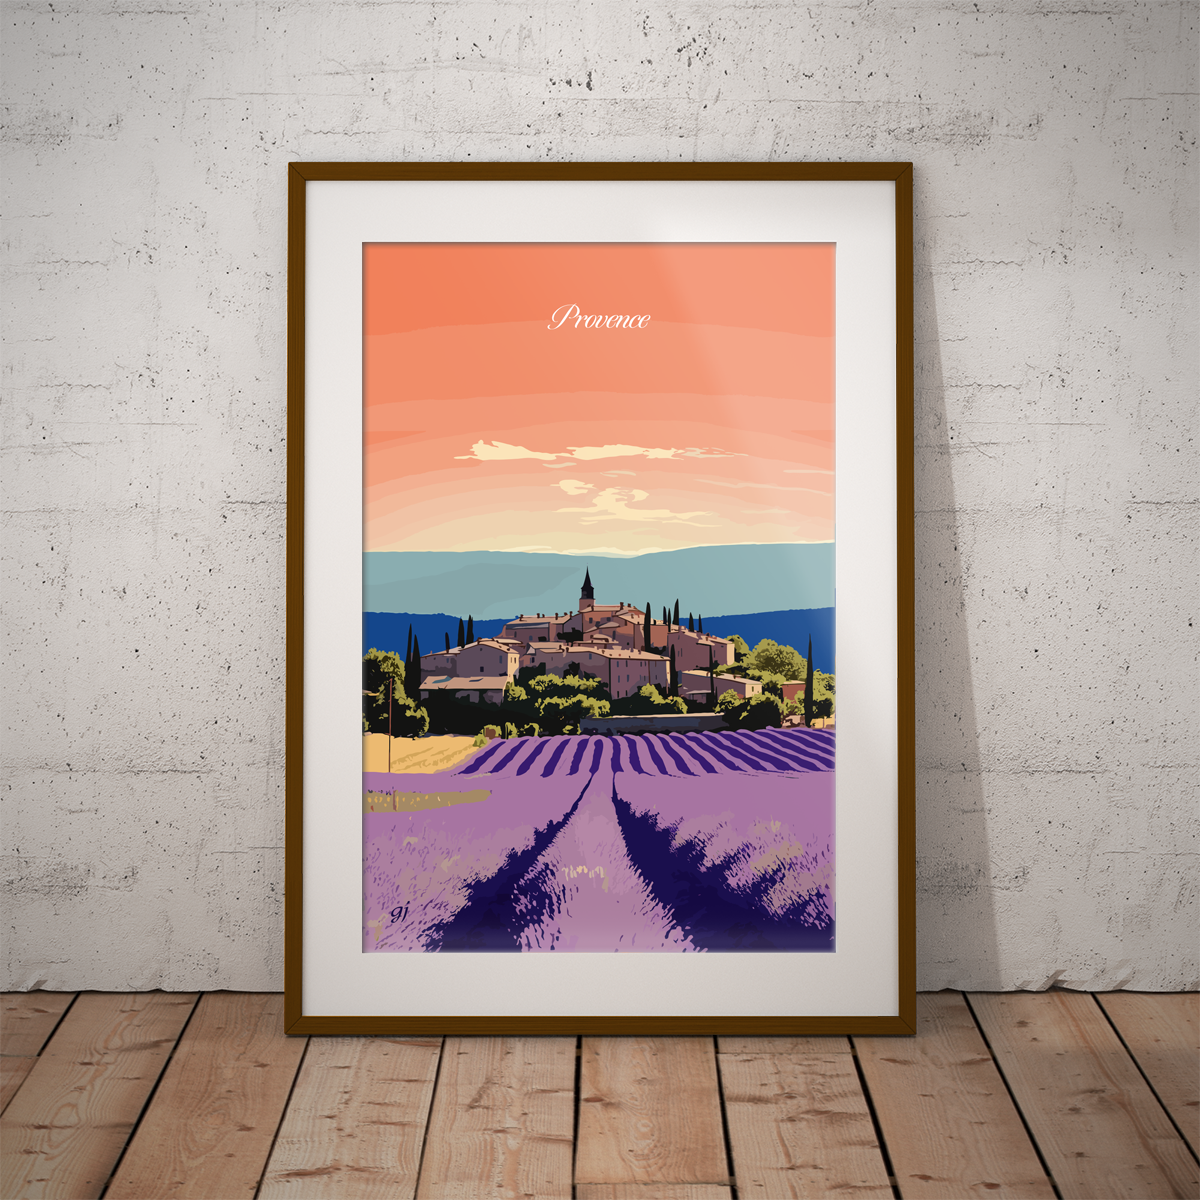 Provence | Travel Poster